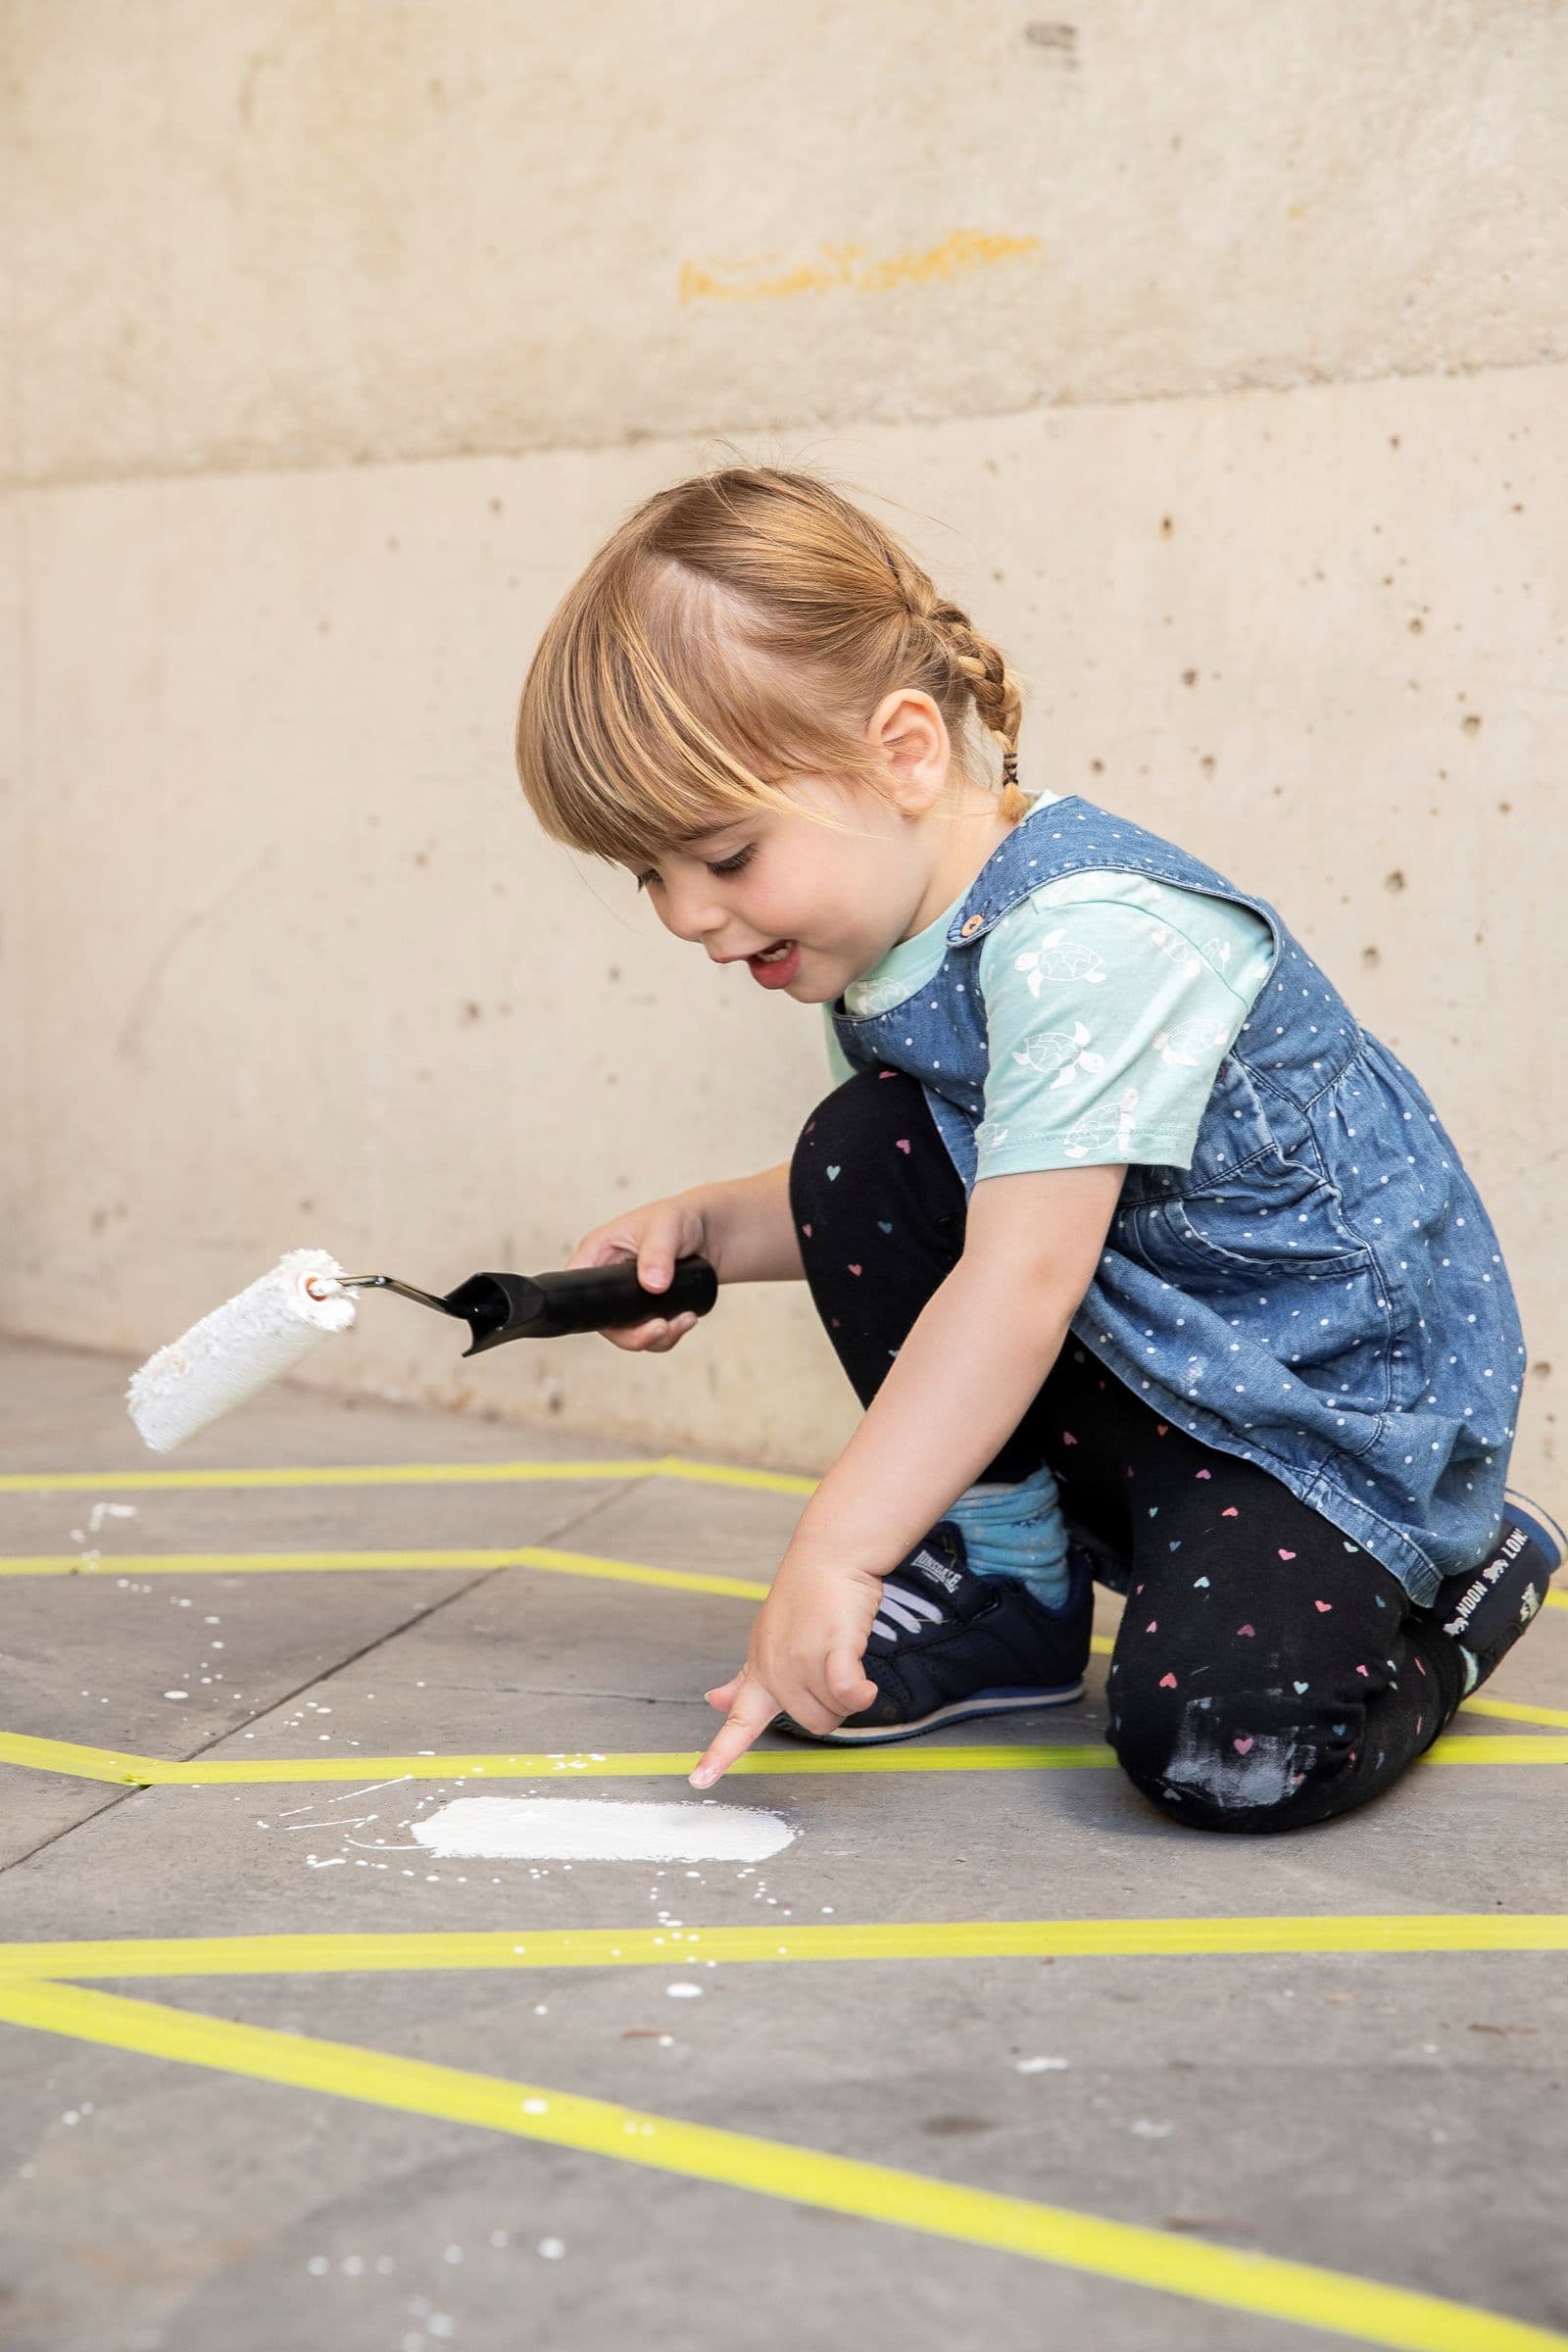 A young child is crouched down touching some paint they have put on the floor using a paint roller they are holding